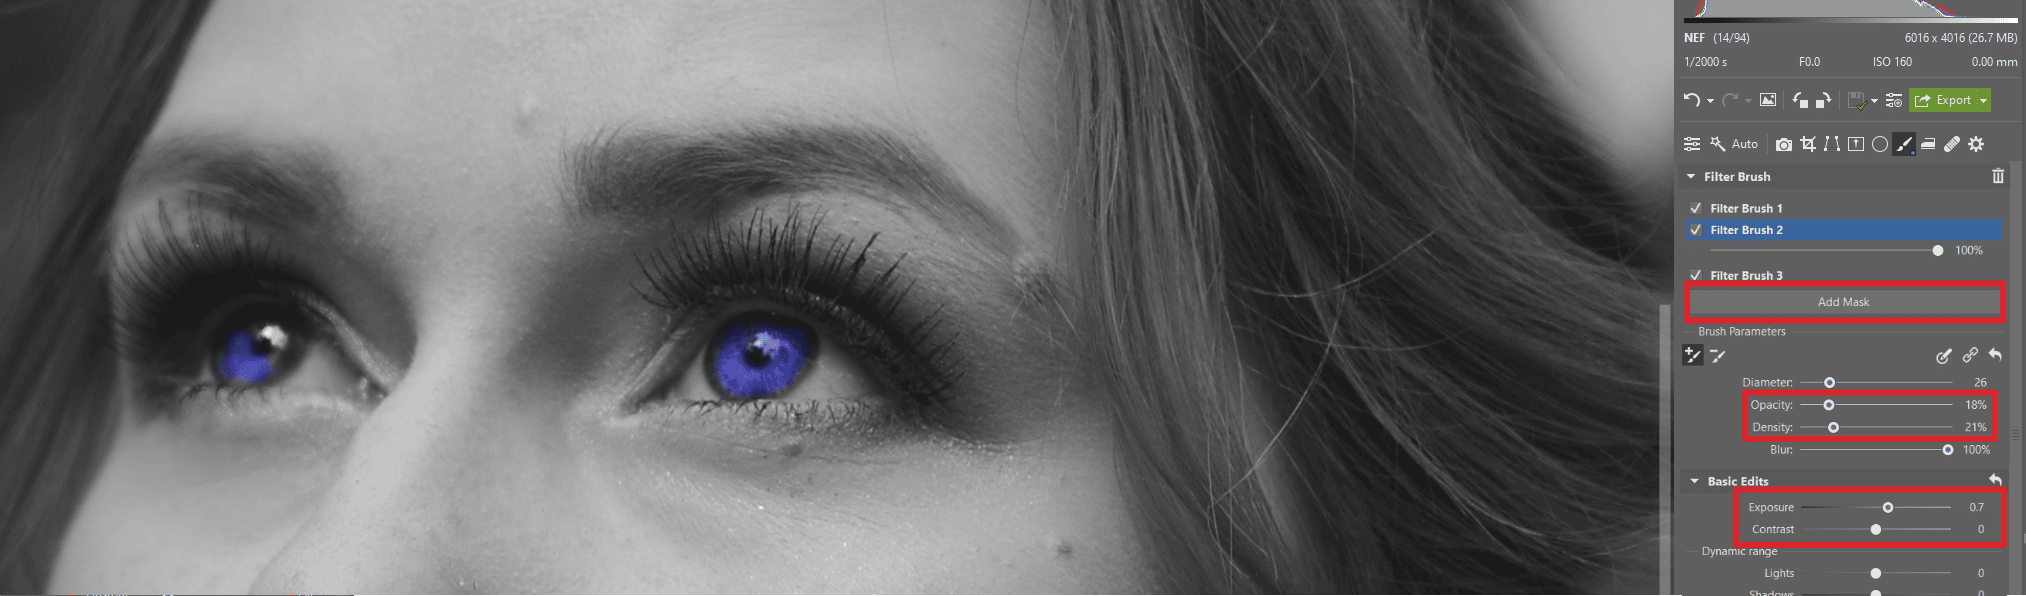 Editing the Eyes to Make Them Pop